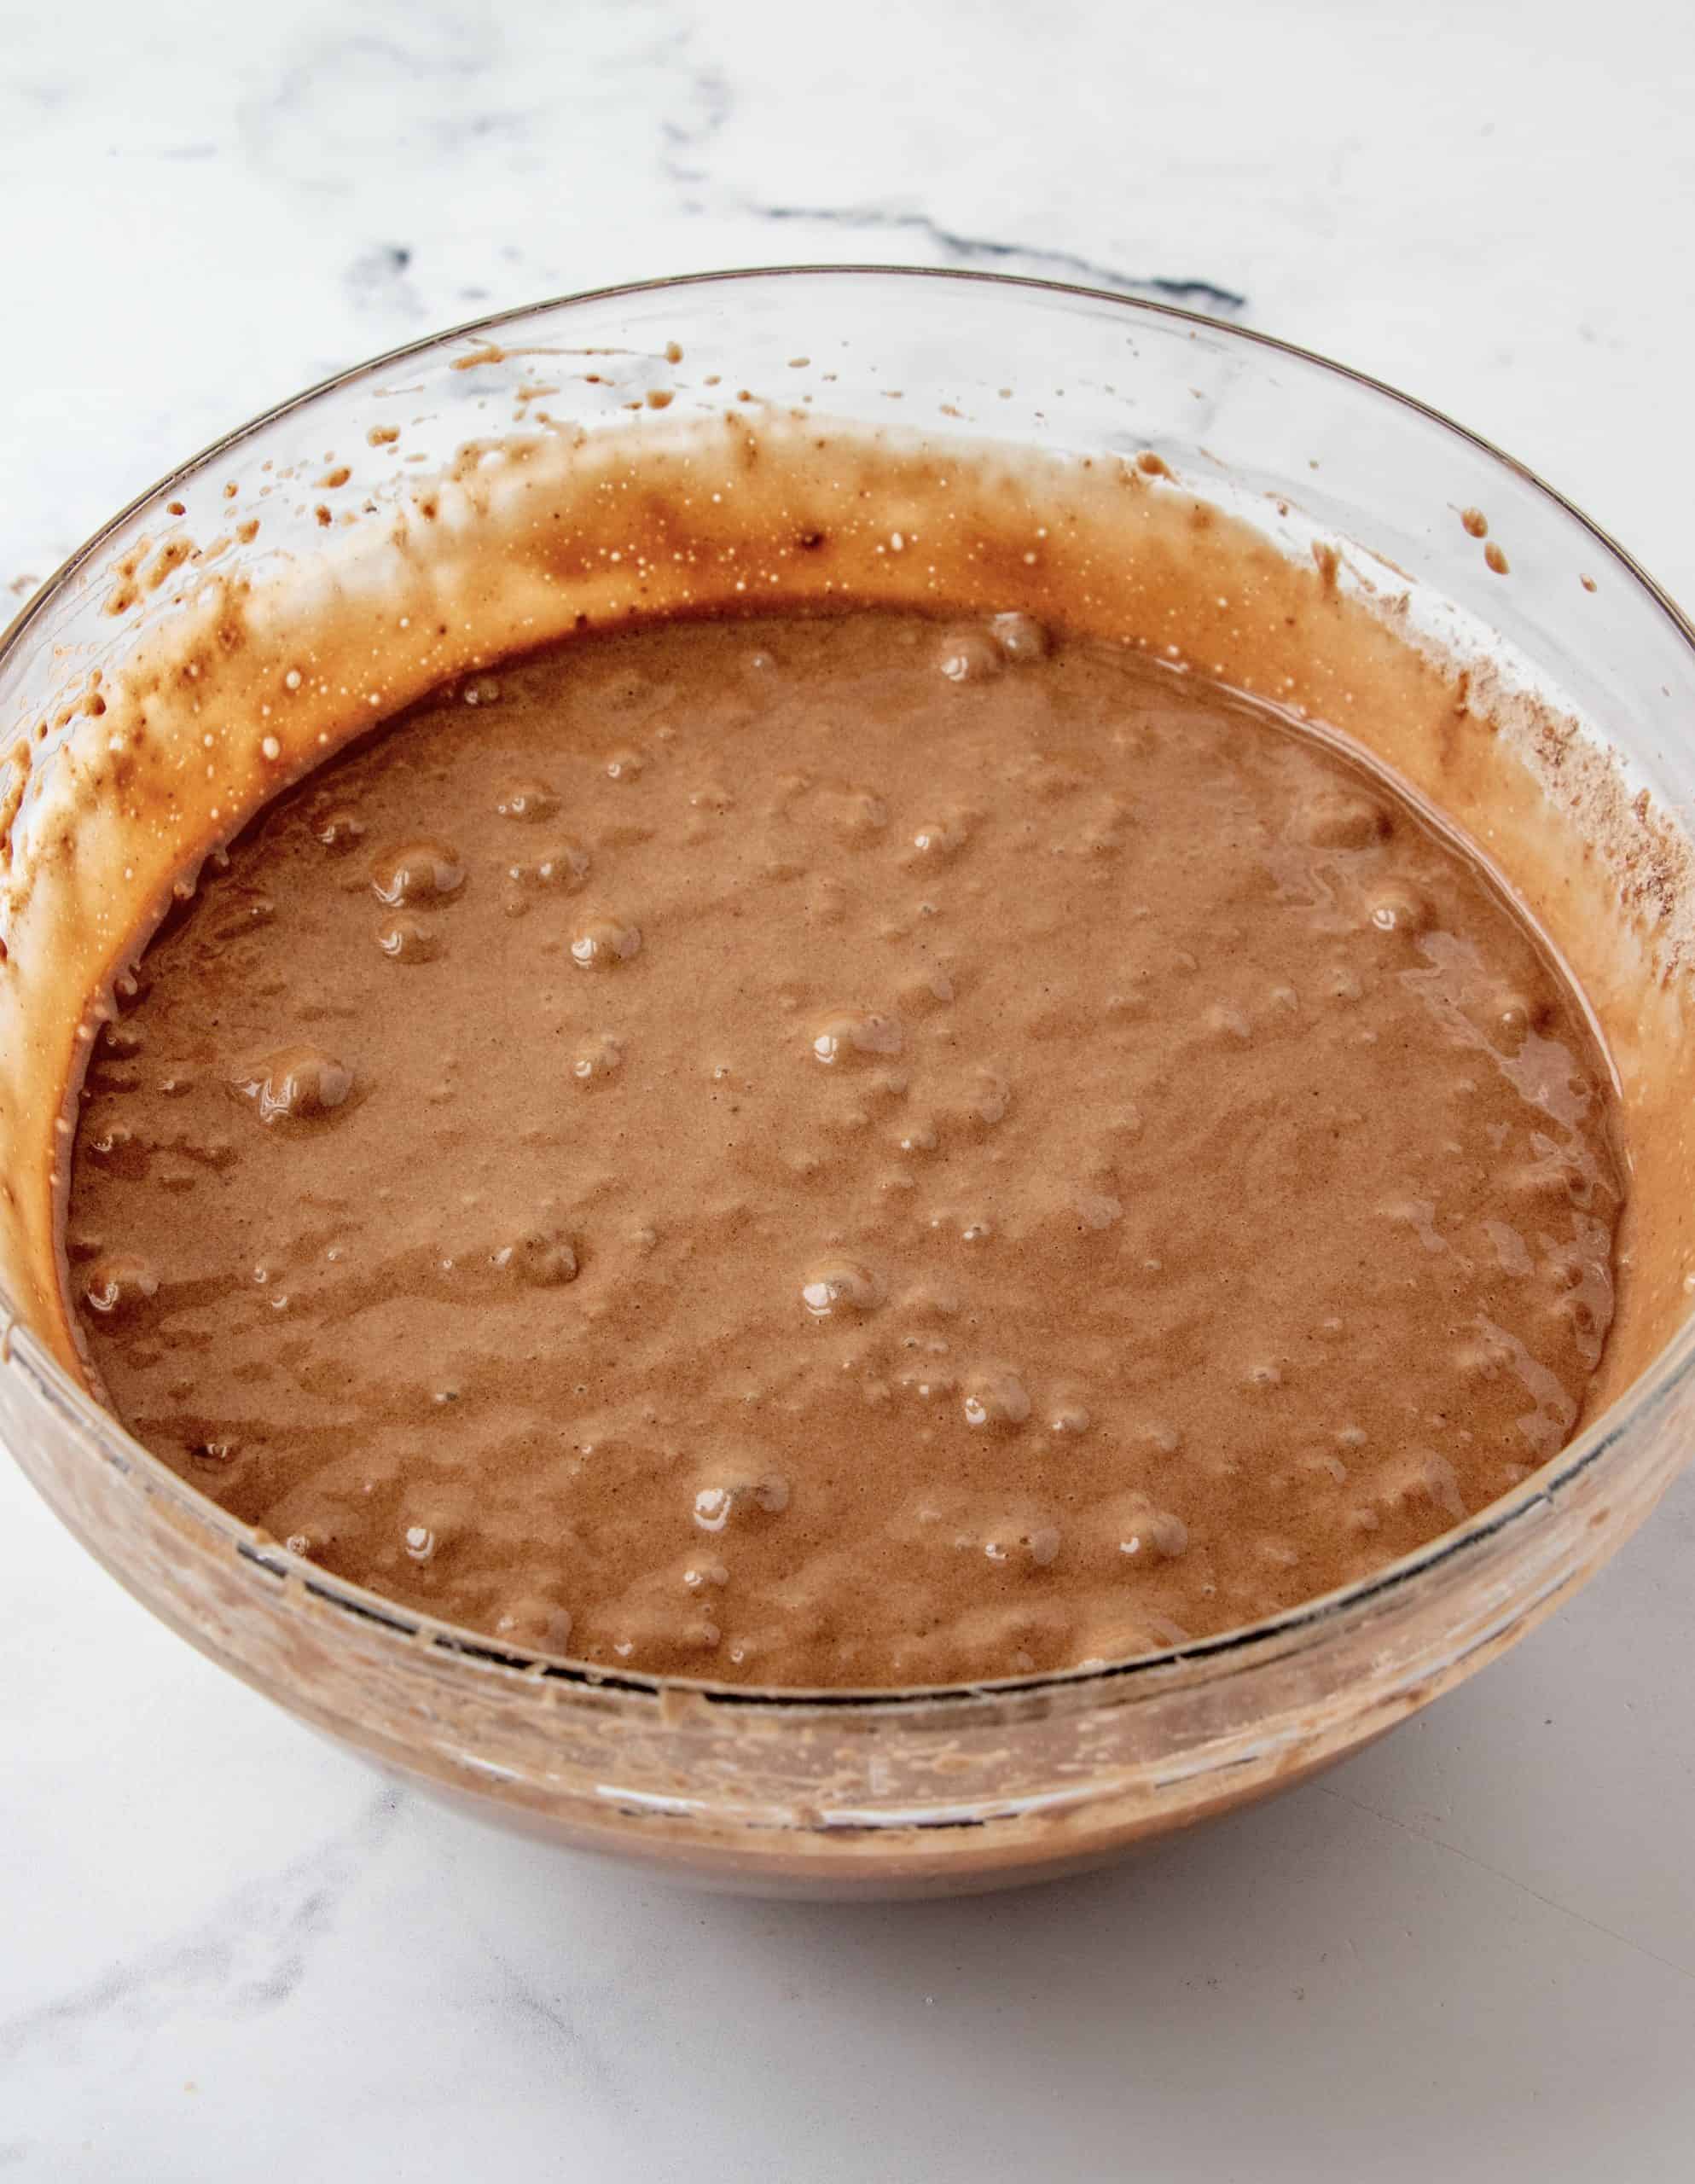 Chocolate cake mix batter mixed up in bowl.